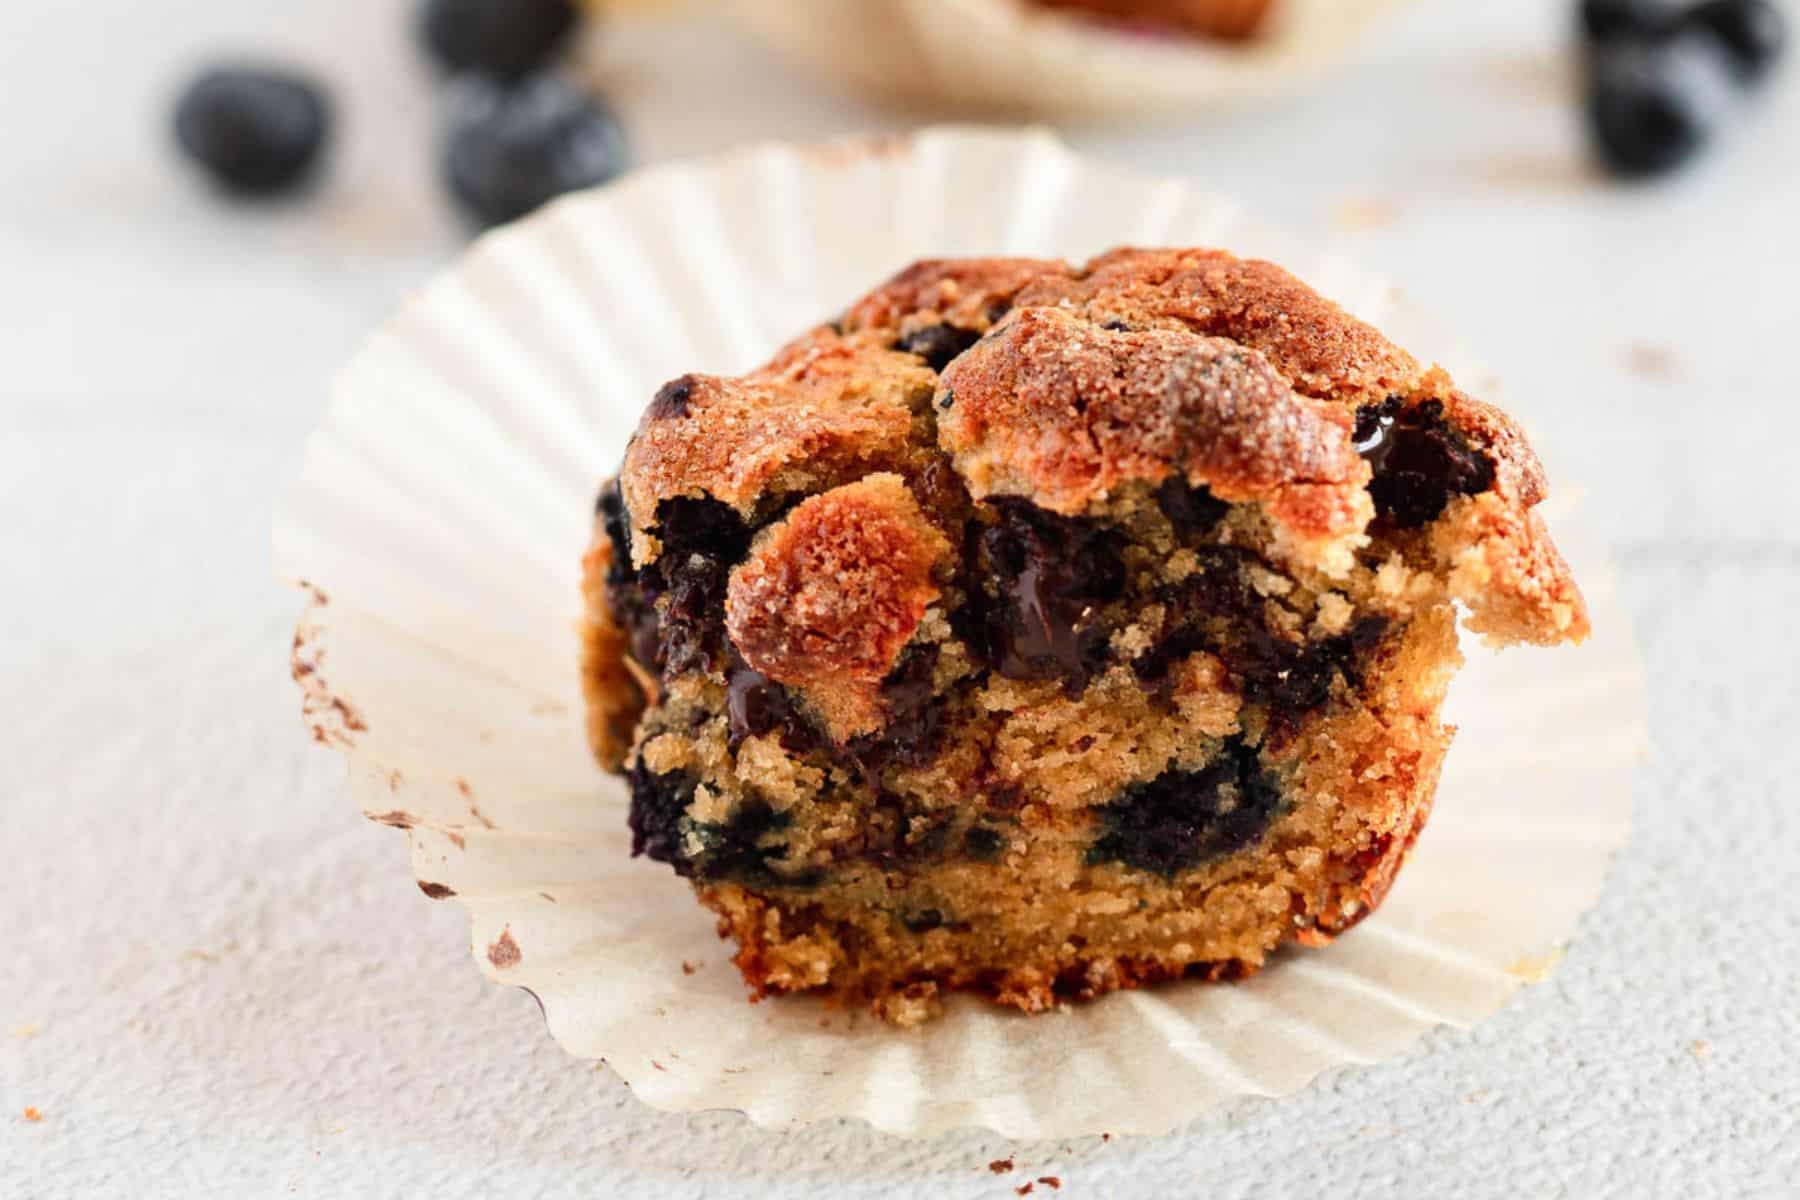 A blueberry muffin with a bite taken out of it.